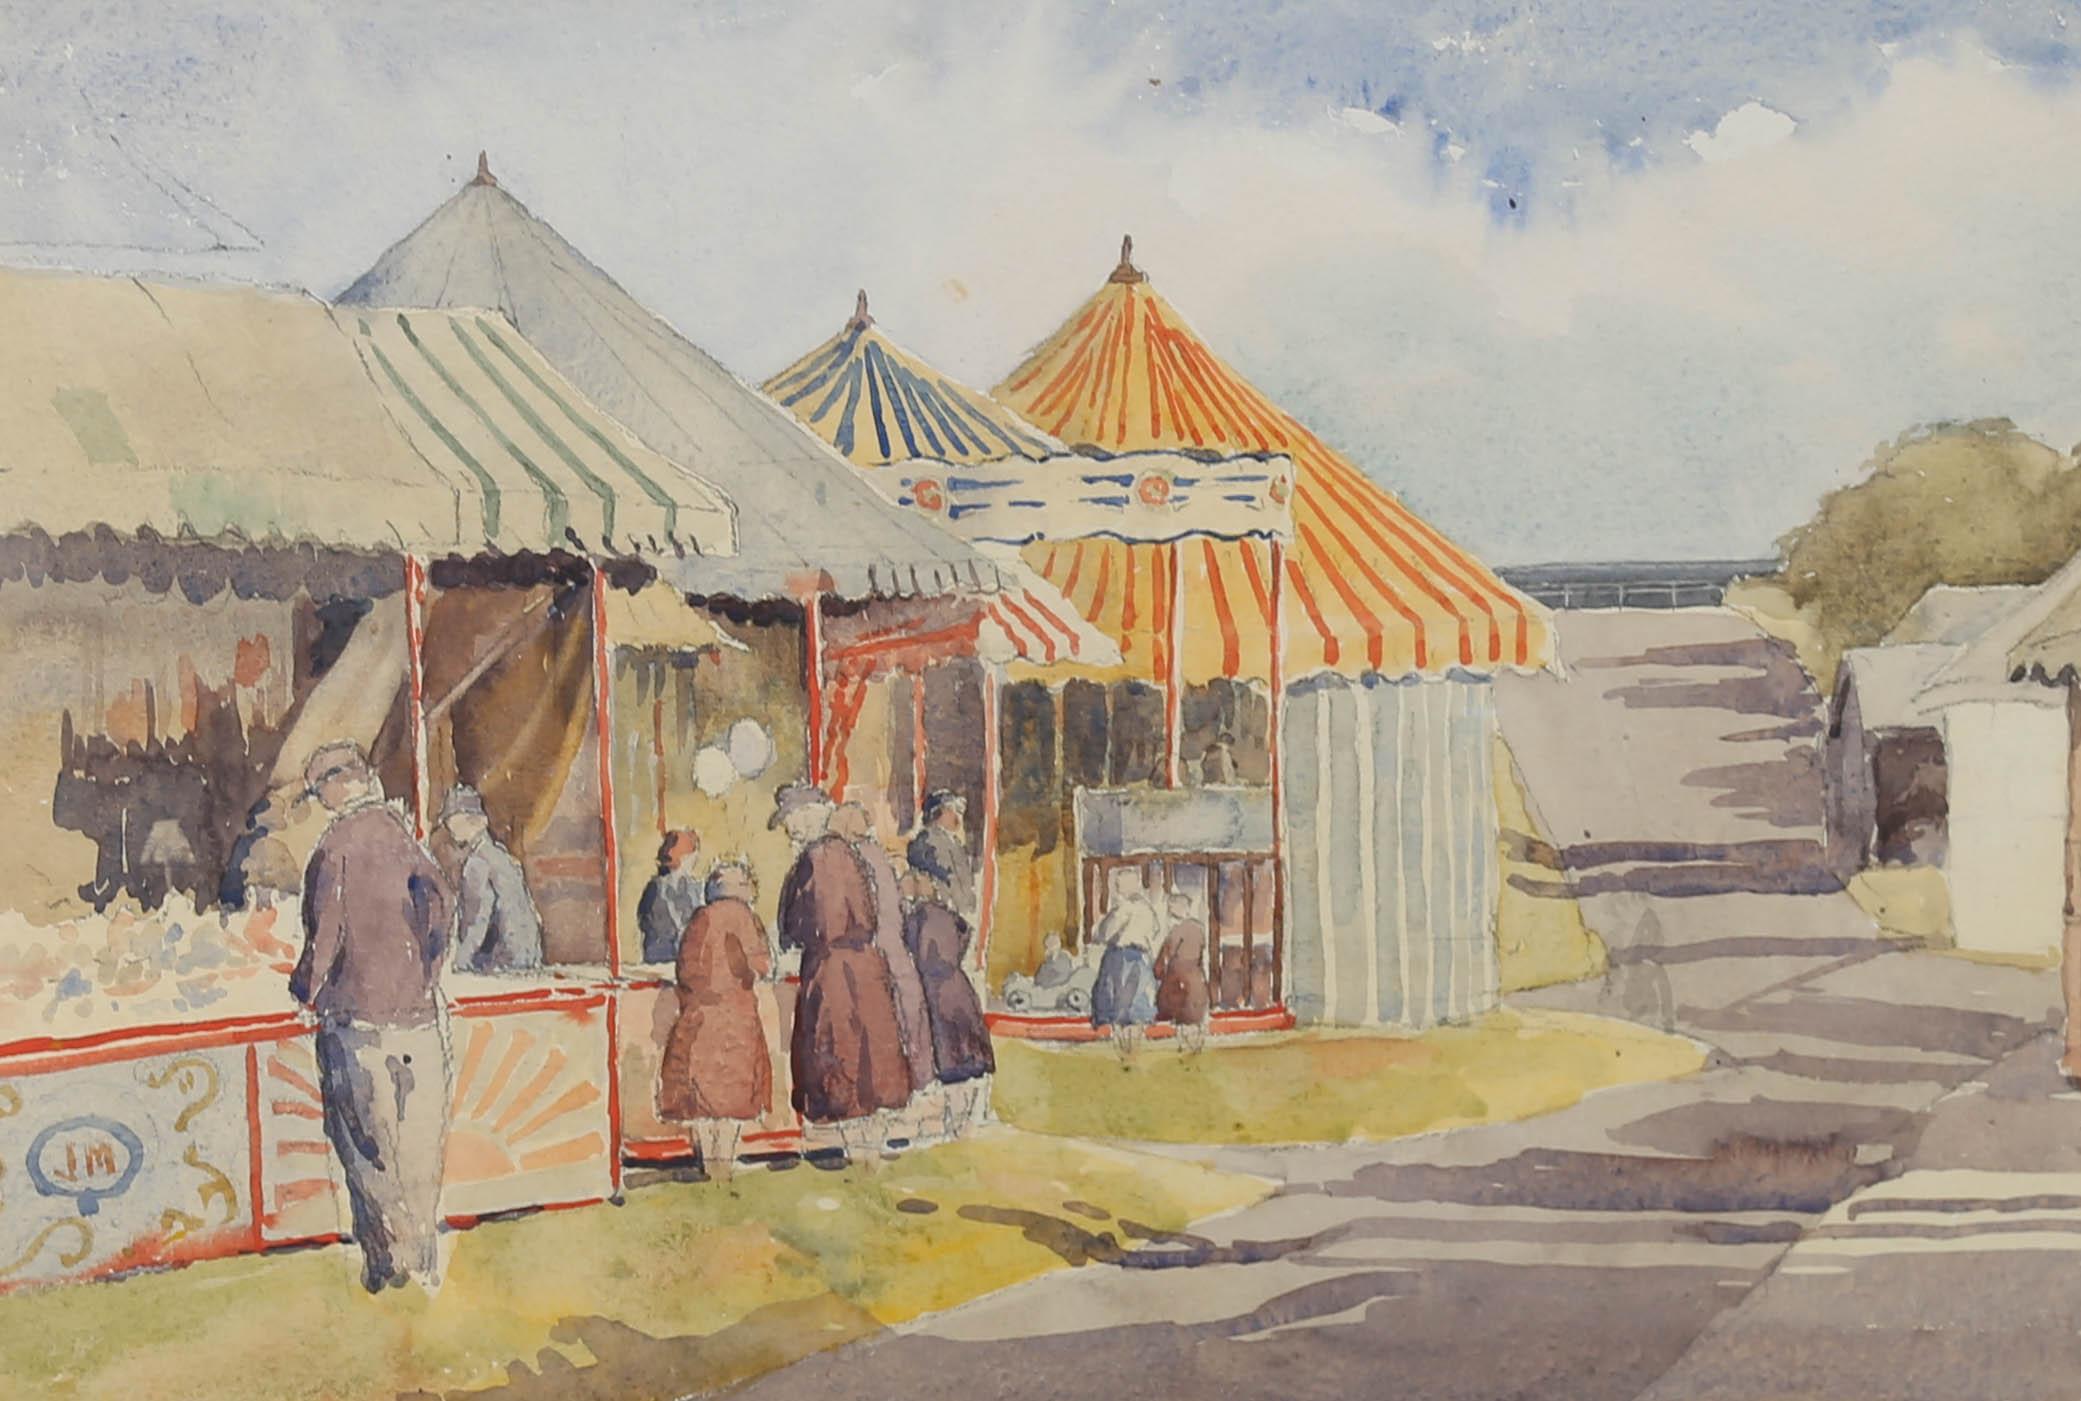 This charming scene depicts a colourful fairground with people playing games and riding fair rides. Signed to the lower right. Presented in a glazed gilt frame. On watercolour paper.